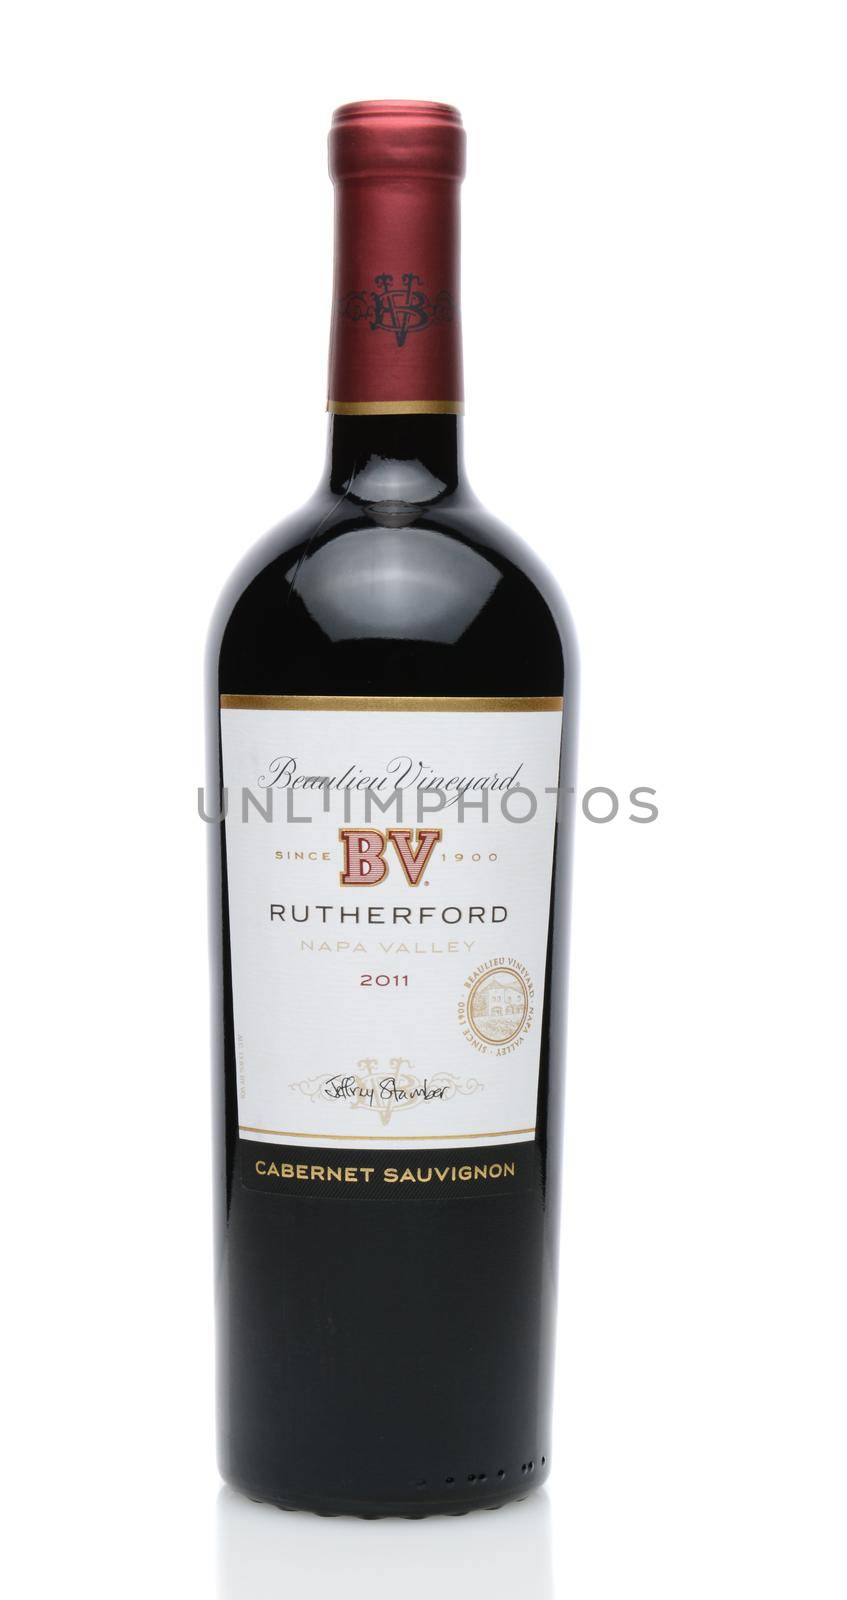 IRVINE, CA - JUNE 23, 2014: A bottle of BV Rutherford Cabernet Sauvignon Wine. Beaulieu Vineyard is the longest continually operating winery in Napa Valley. 